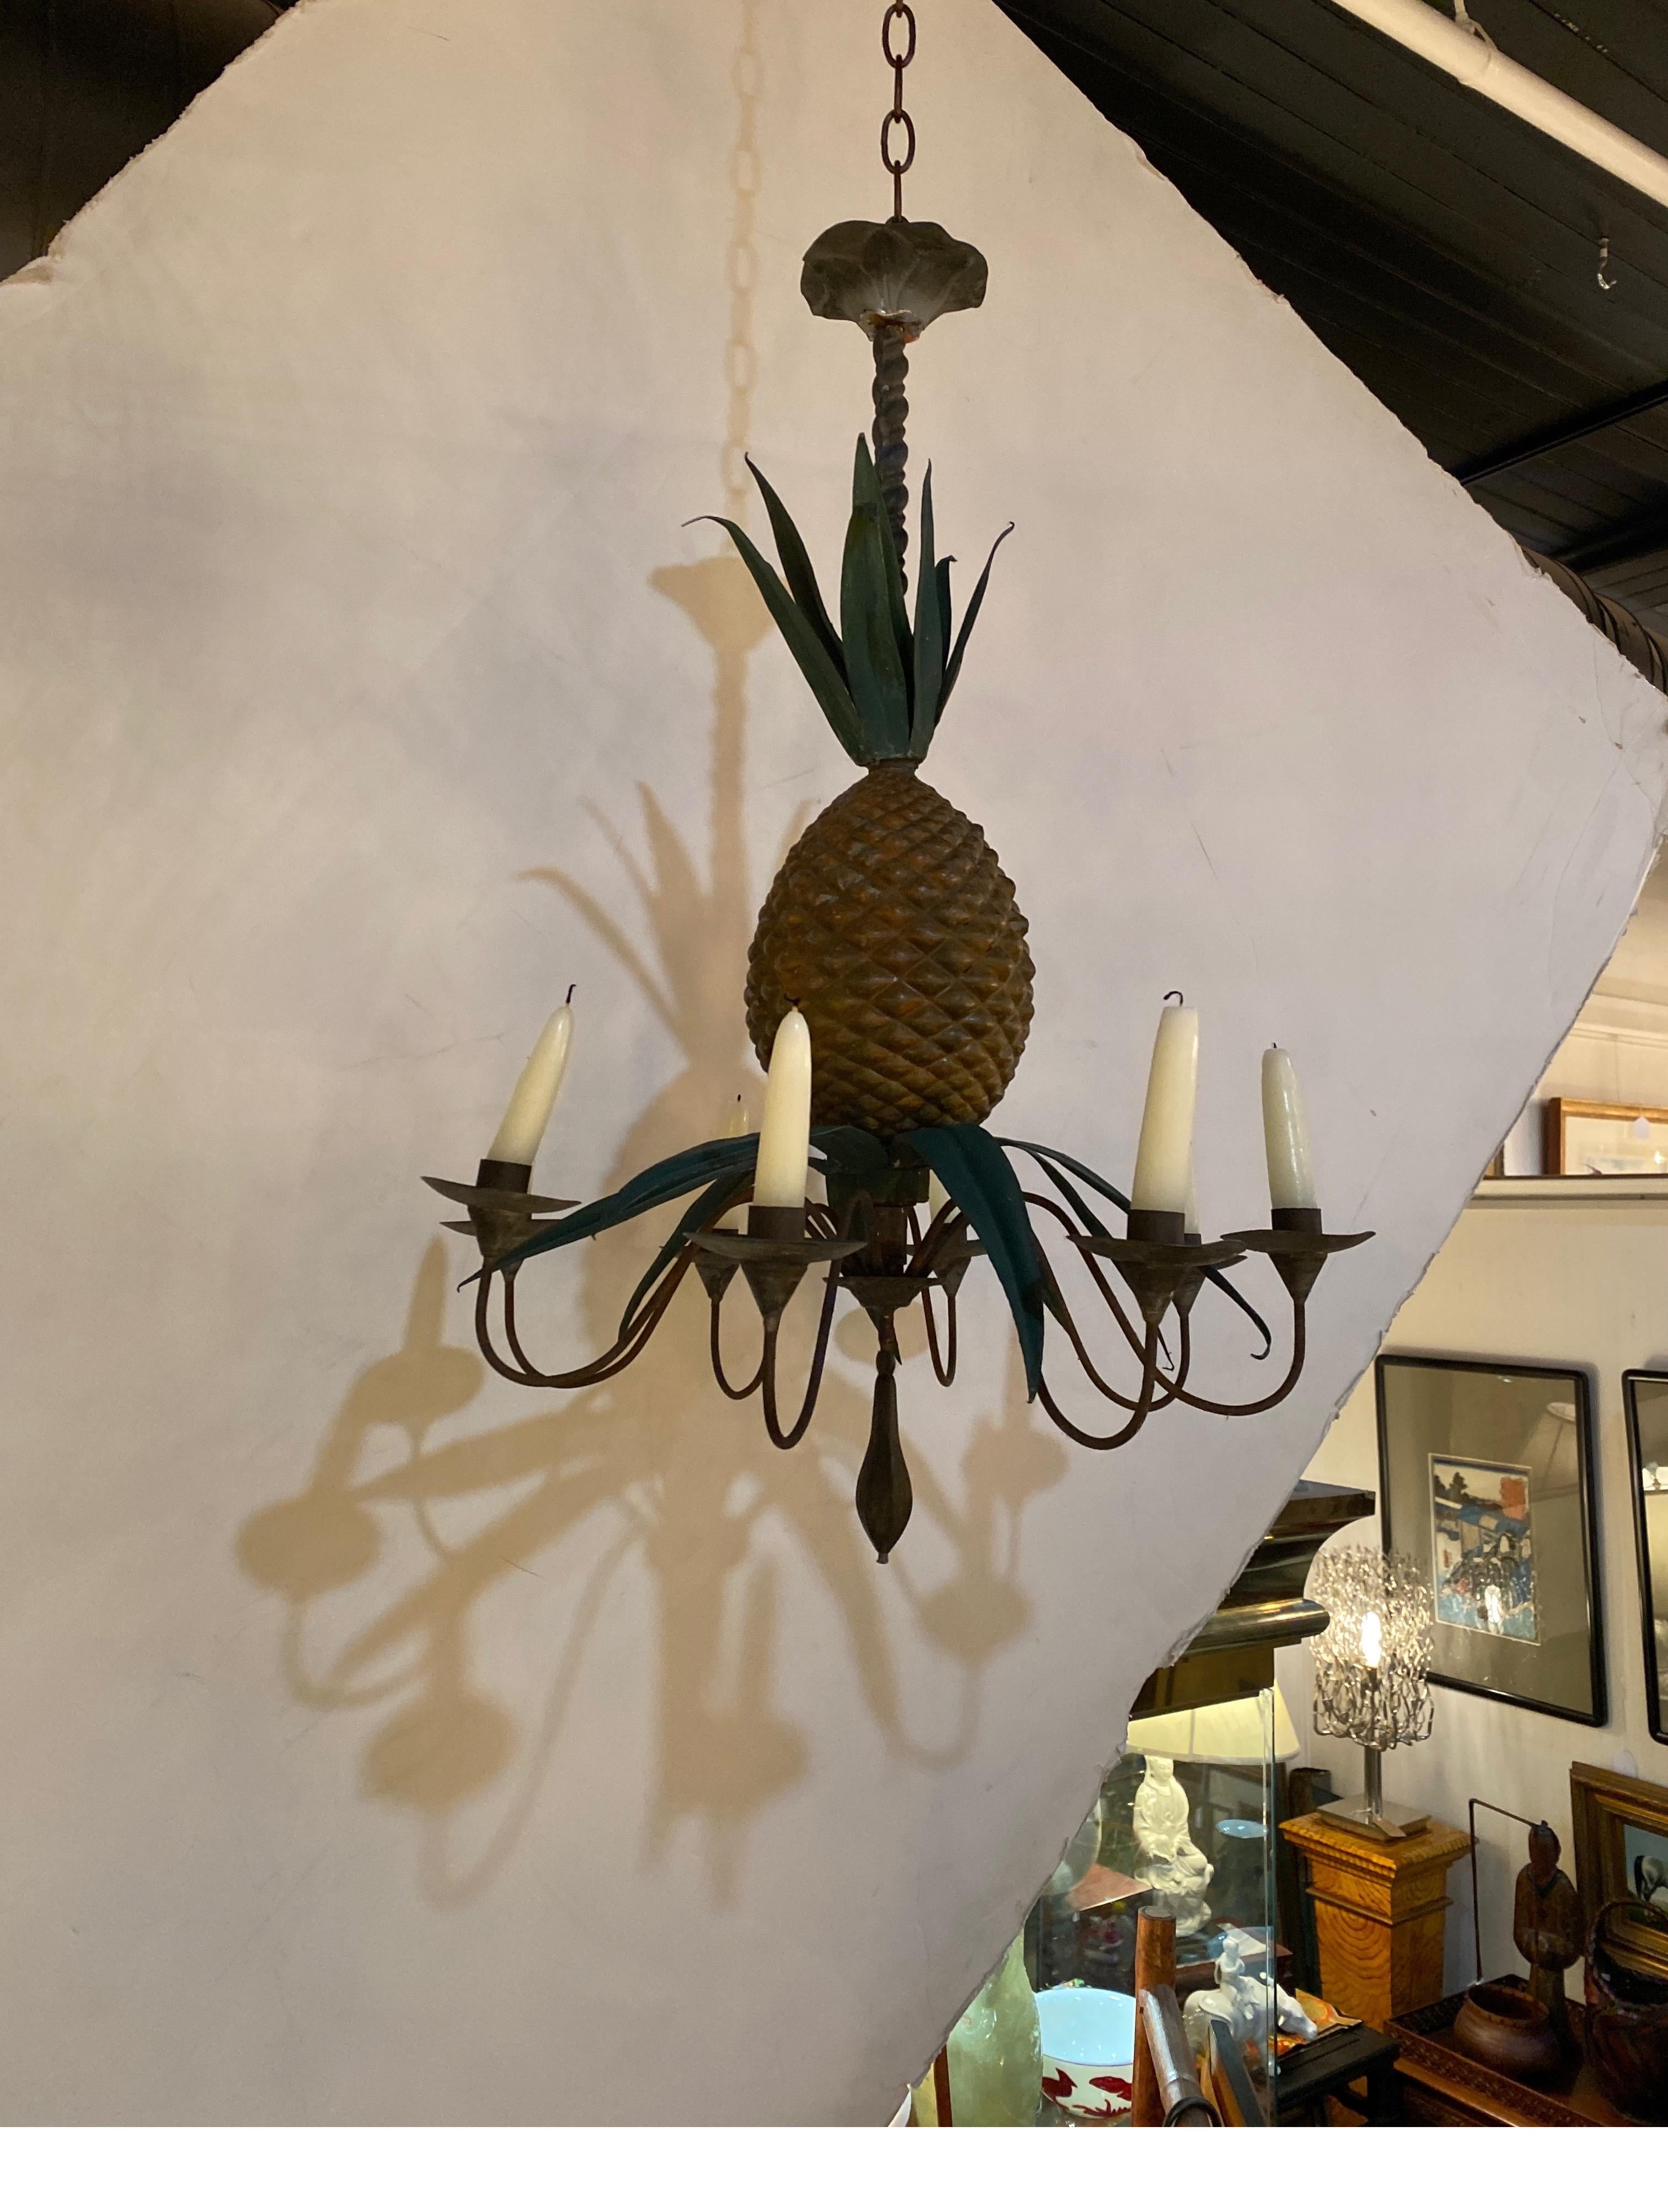 A whimsical hand painted tole and zinc 8 arm chandelier for candles. The chandelier in the form of a pineapple with leaves. Mid 20th century.